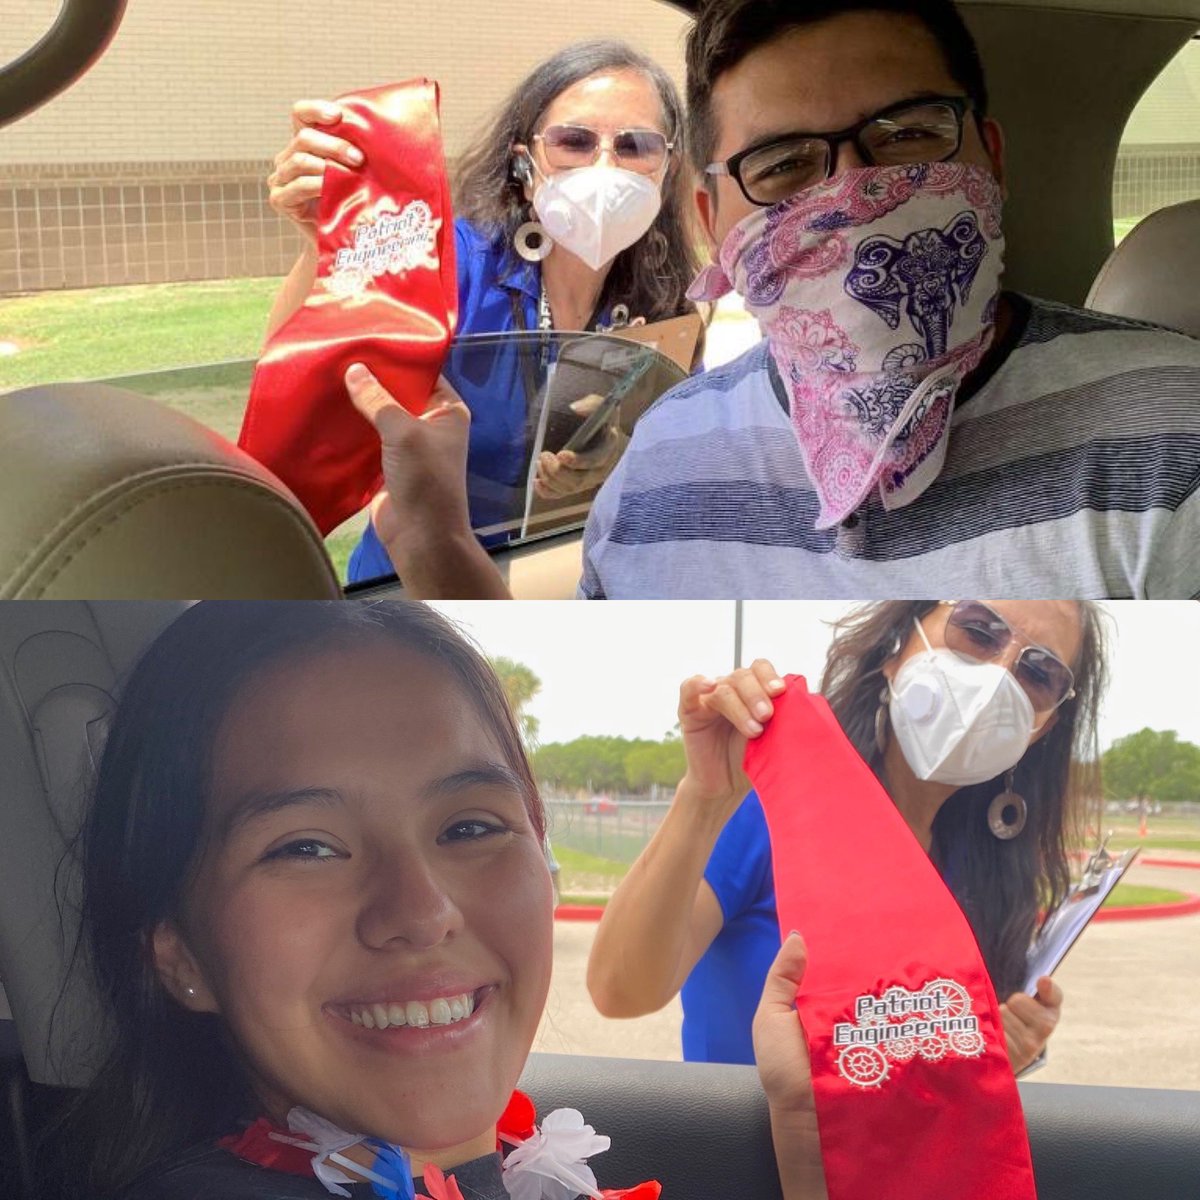 Seniors stopped by for their stoles, cords, & #FIRSTAlumni packs! We are extremely proud of them and thankful for the impact they have made in our program & community. Congratulations! 👏🏼🥳🎉👨🏻‍💻👩🏻‍💻🦾🛠⚙️ @MissionCISD @FIRSTRGV @FIRSTinTexas #FIRSTinspires #graduating #patriotnation